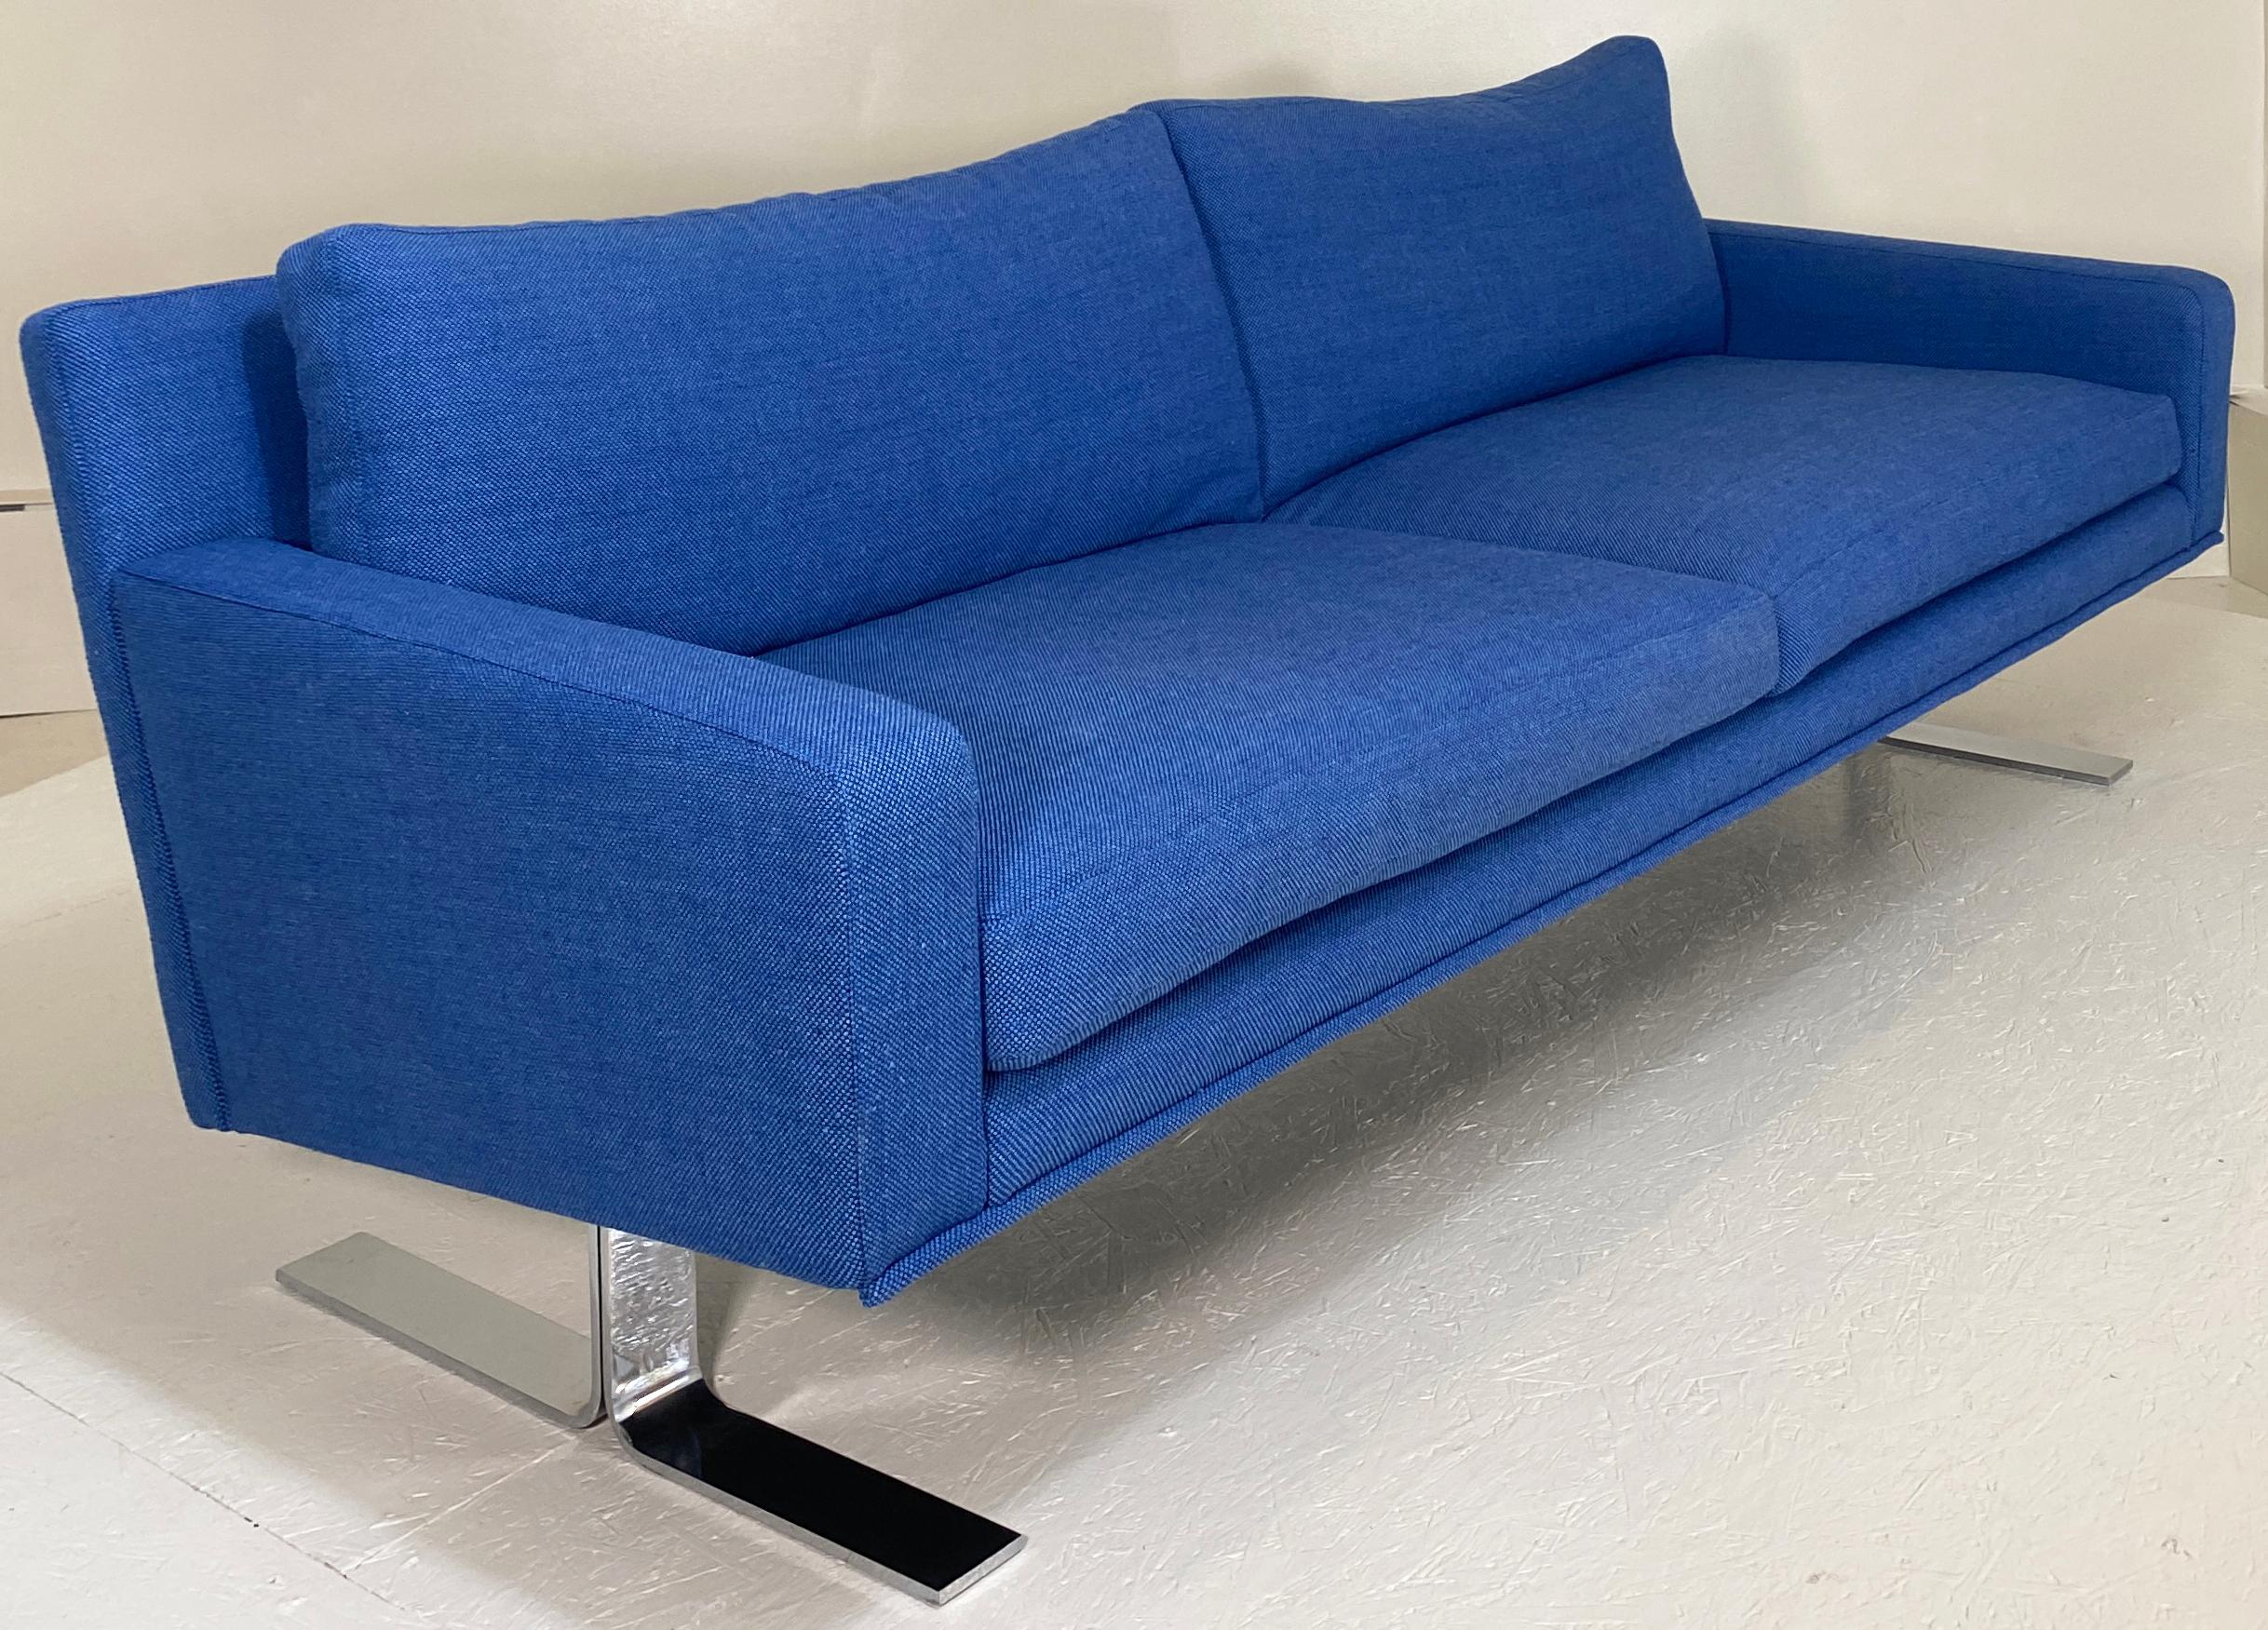 Mid-20th Century Erik Ole Jorgensen for DUX Sofa with Down Cushions in Knoll Fabric For Sale